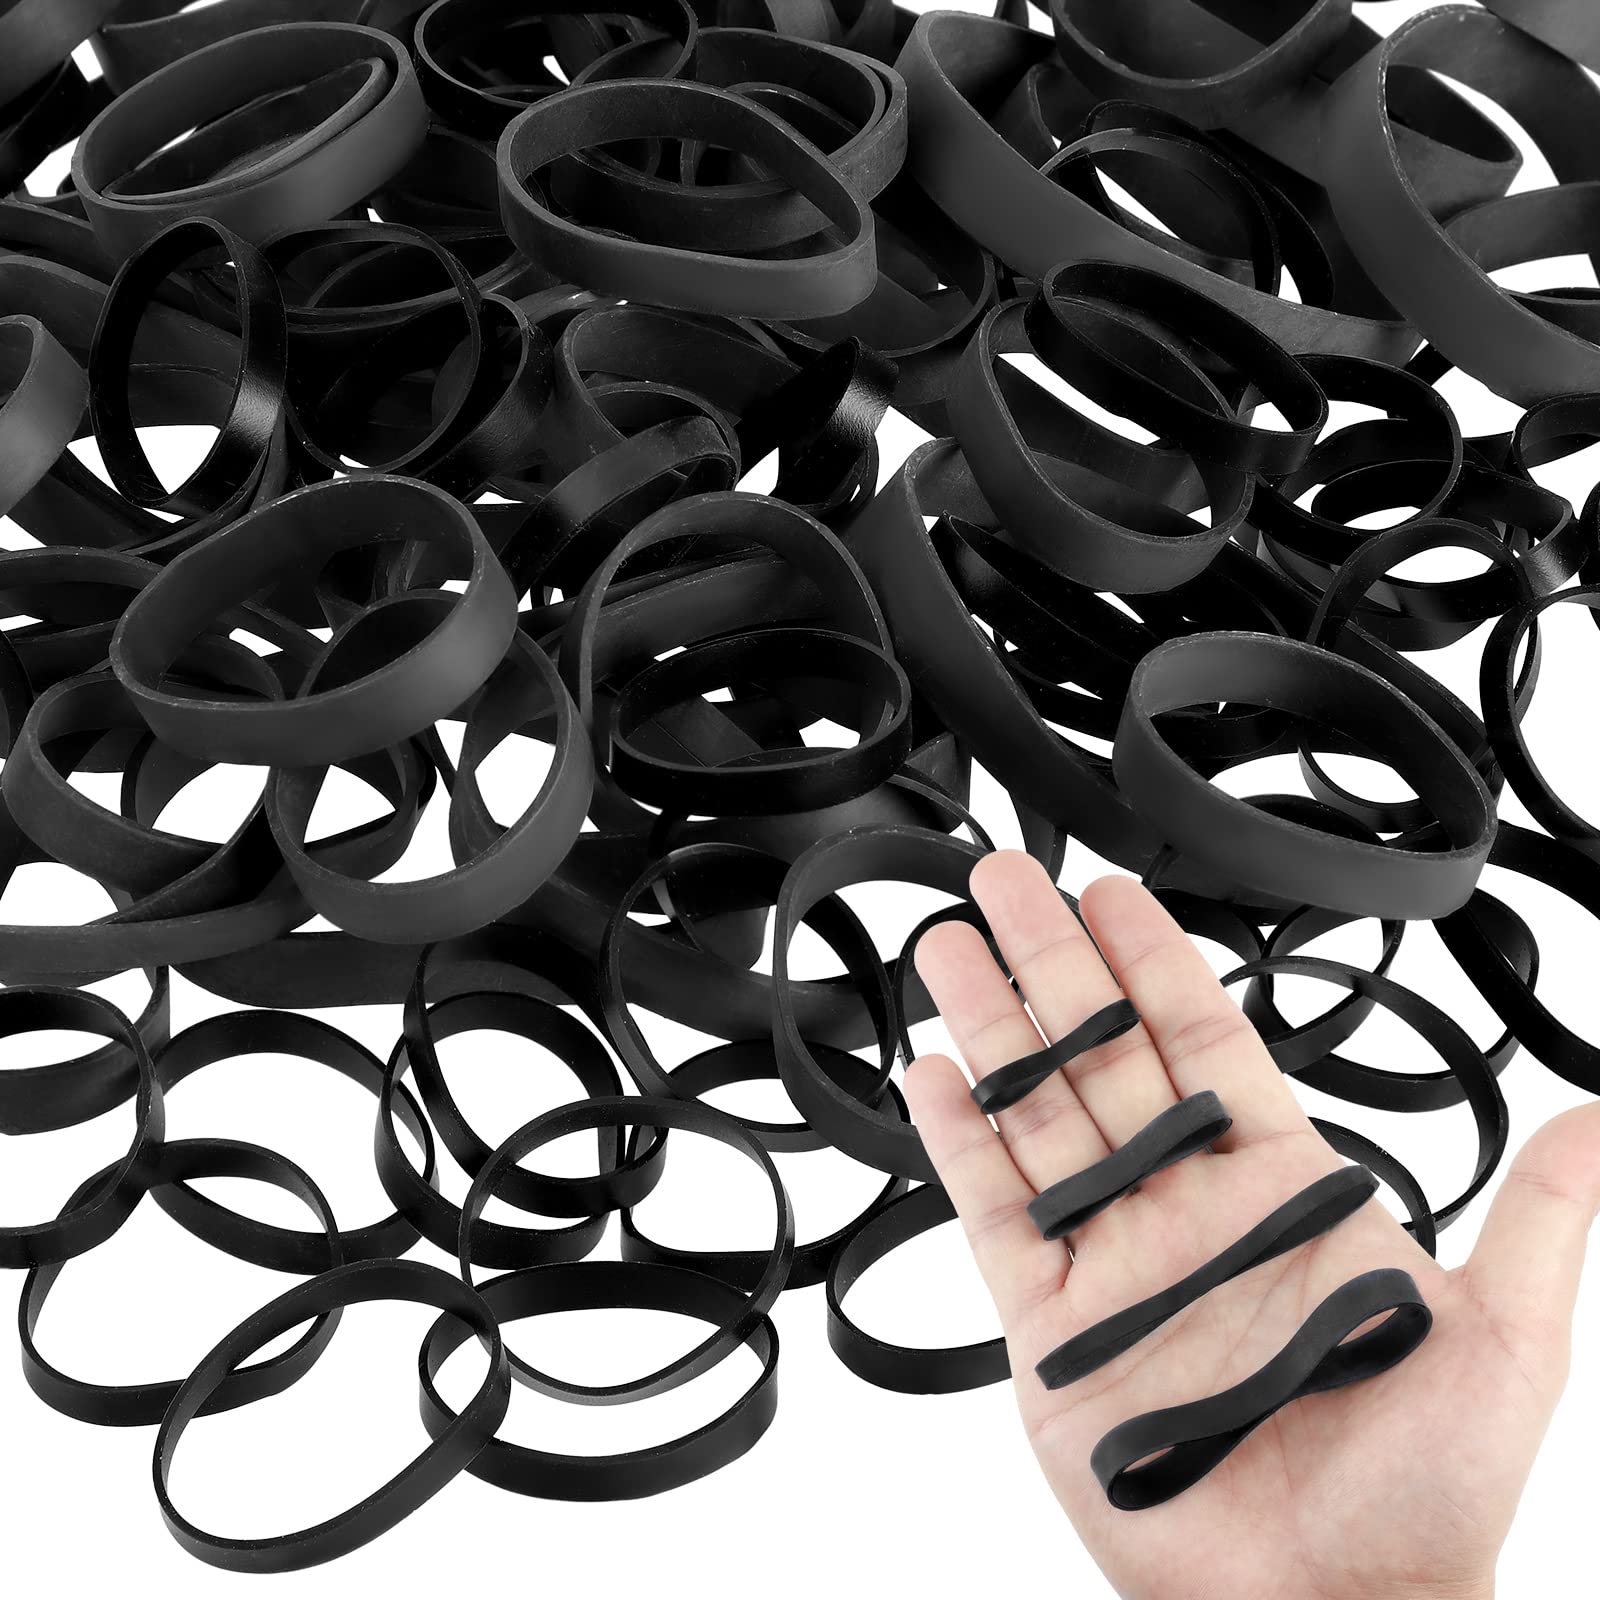 Tactical Rubber Bands Black Ranger Heavy Duty Rubber Bands Black Thick  Outdoor Bands for Camping Survival Sports Hiking Biking Fixed Item, 4 Sizes  60